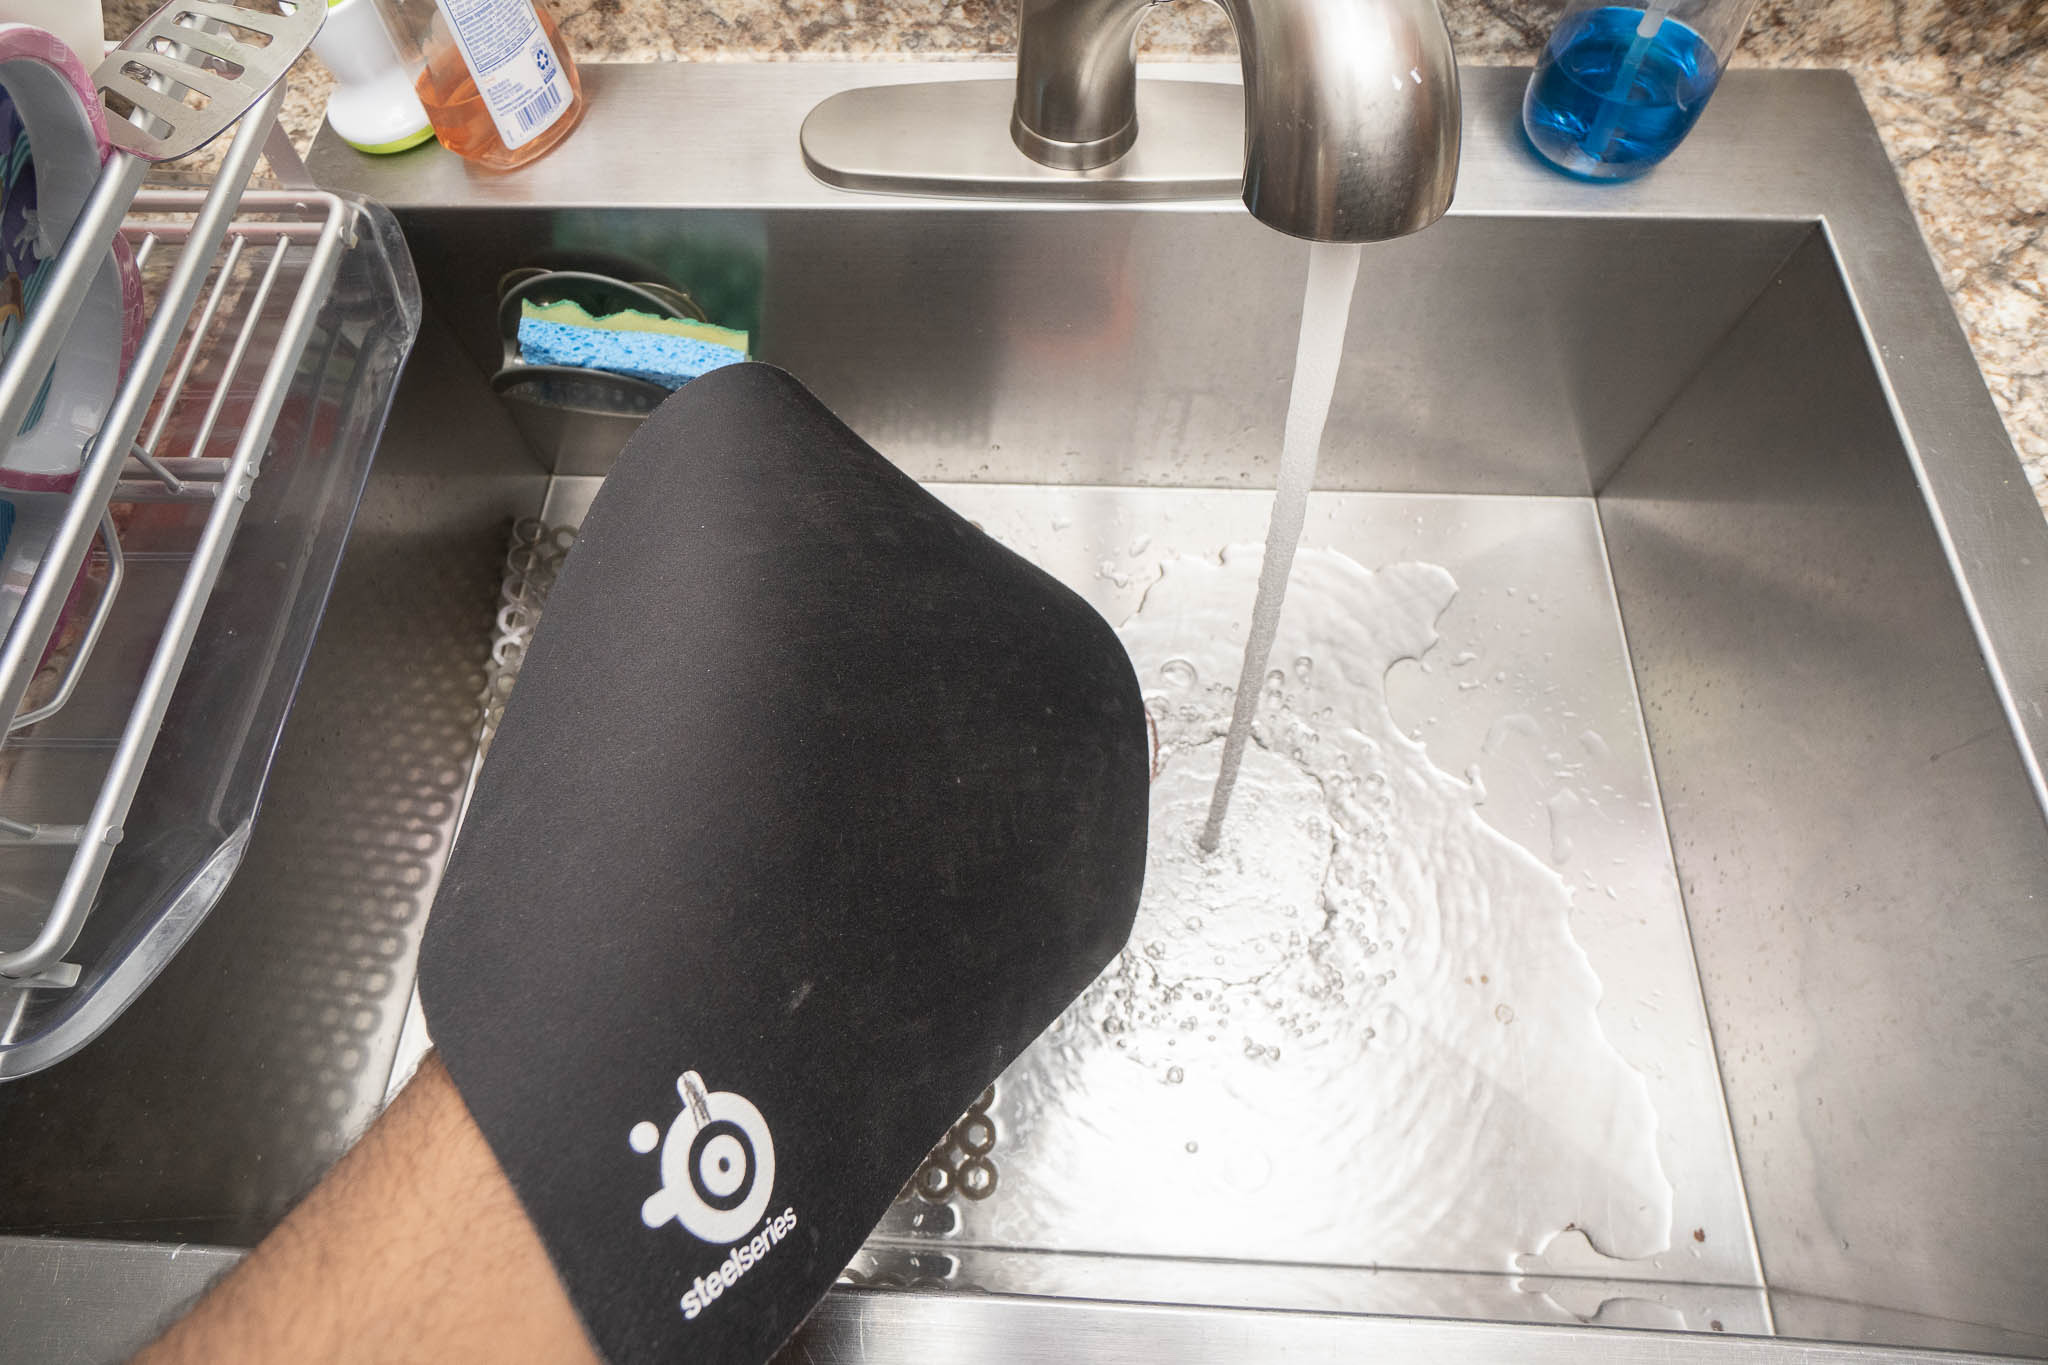 Rinsing mouse pad with cold water